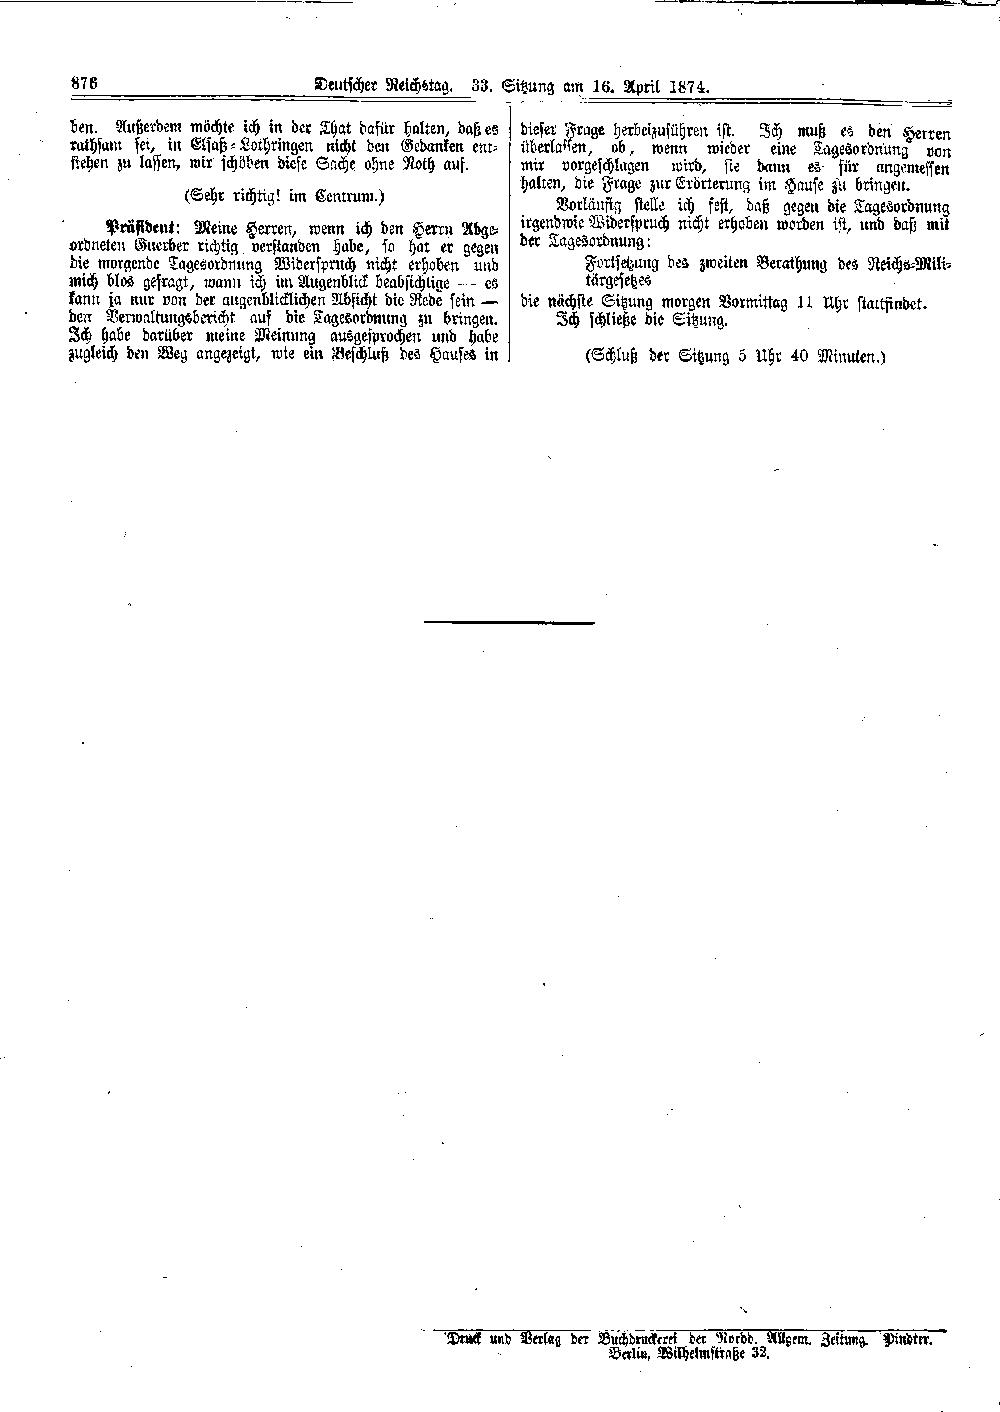 Scan of page 876